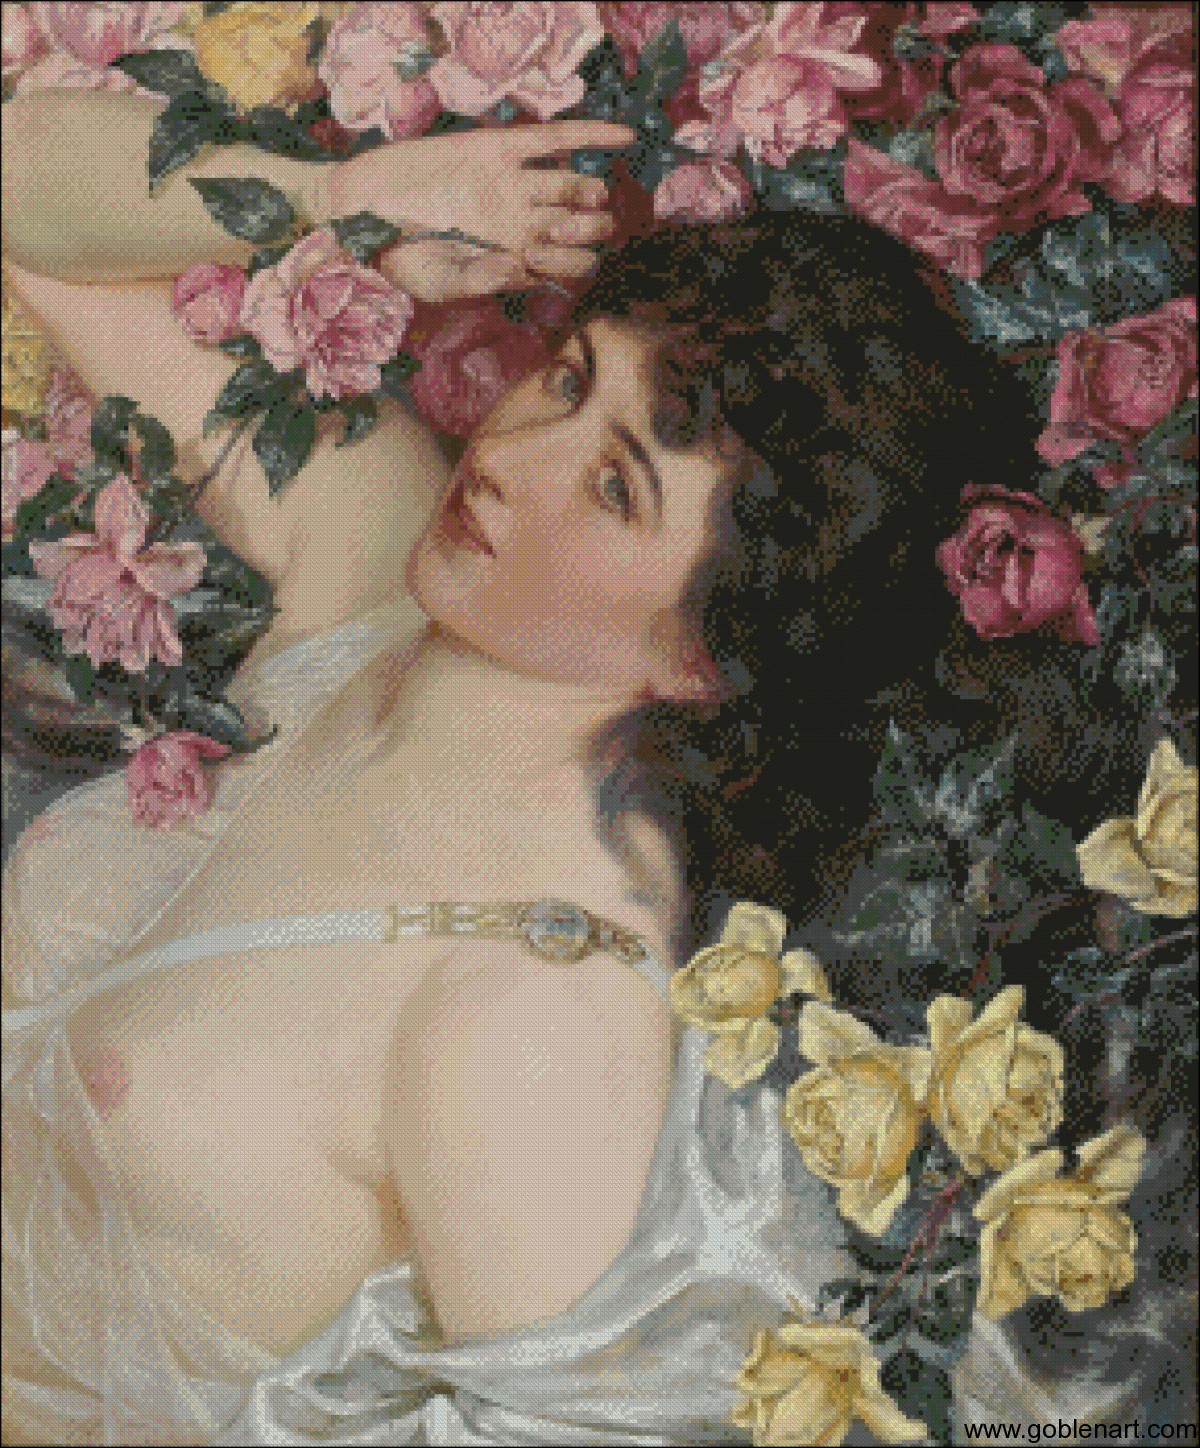 Talbot Hughes - Among the roses